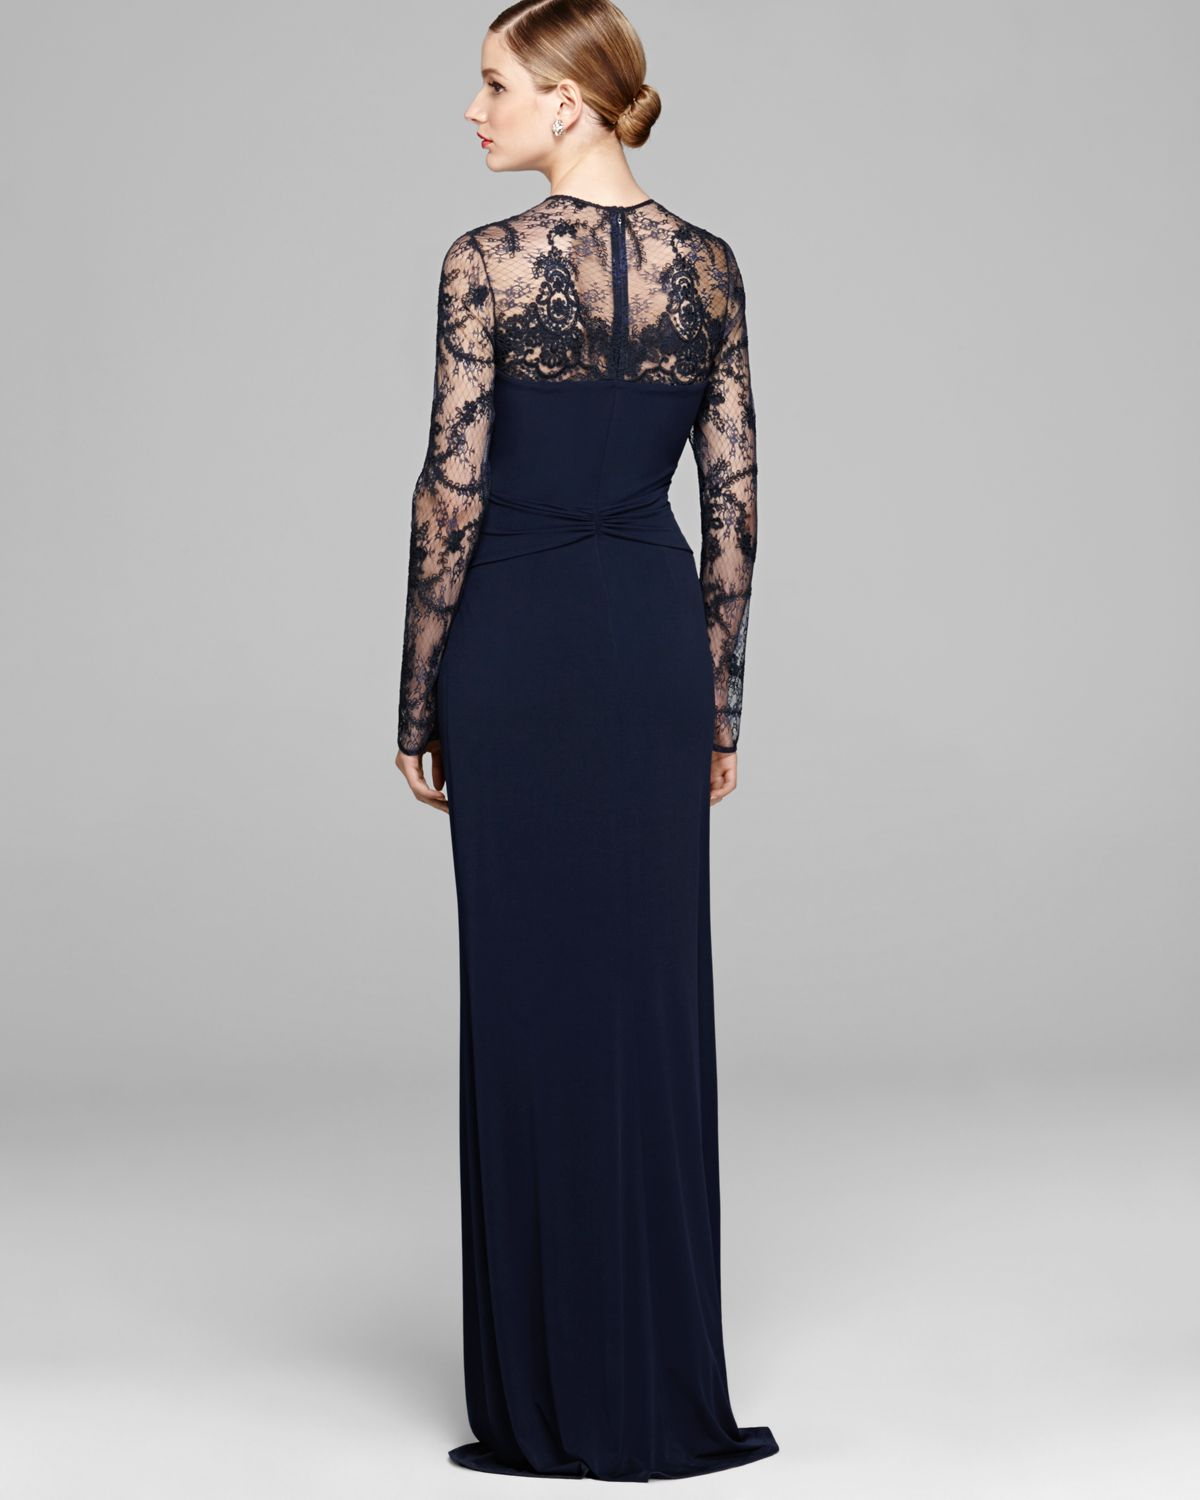 Lyst - David Meister Gown Long Sleeve Illusion Jersey with Drape Knot ...